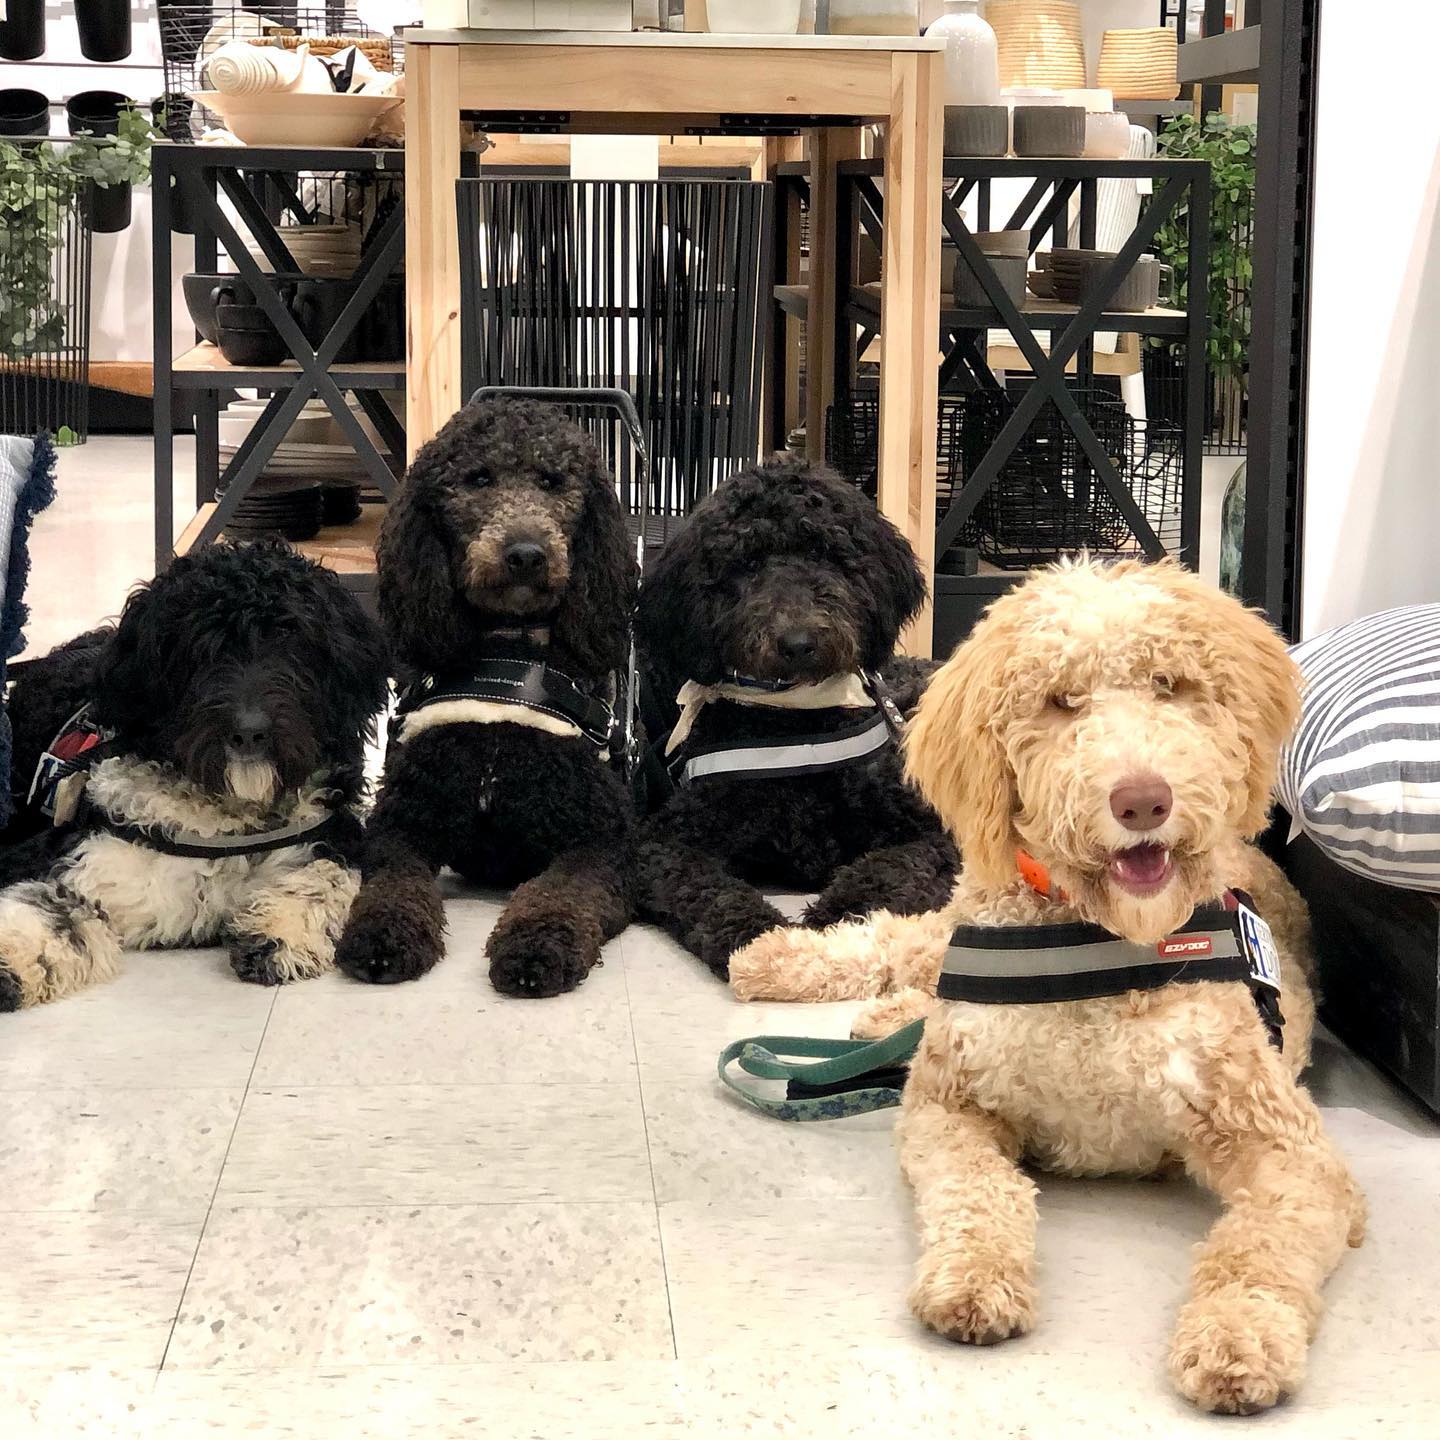 service dogs in training at the grocery store